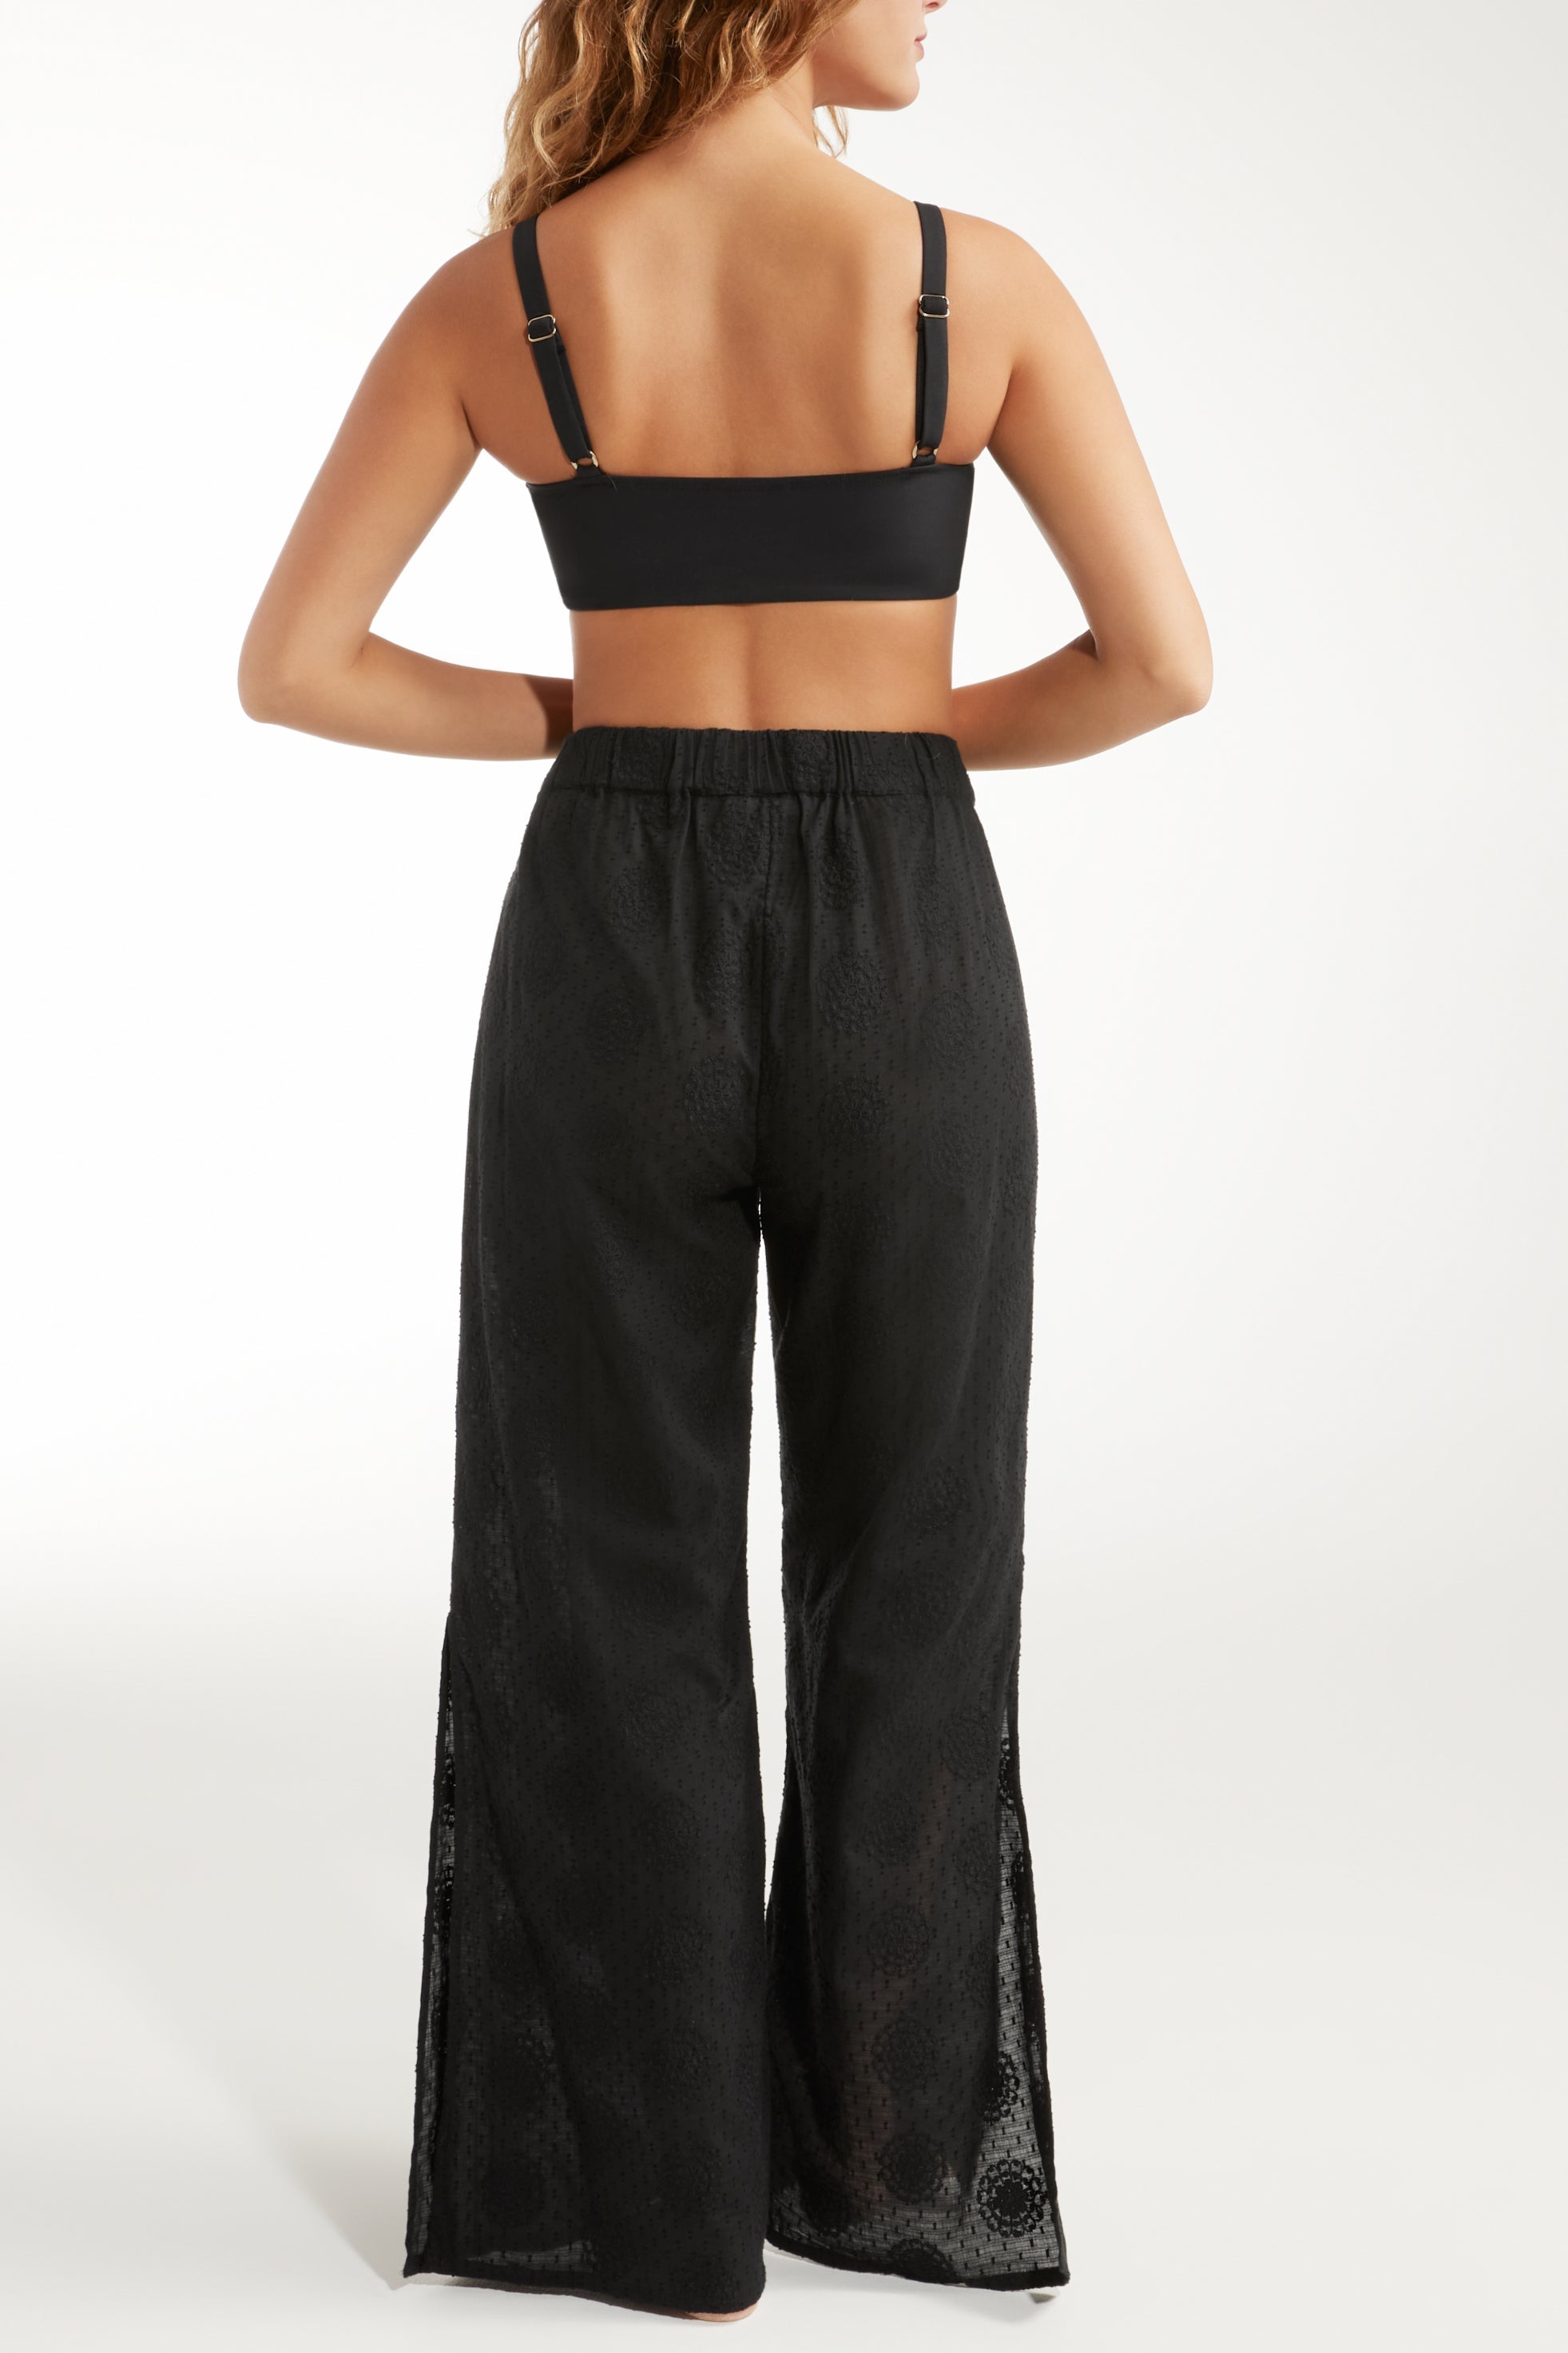 Eve Gaucho Pant by Hermoza